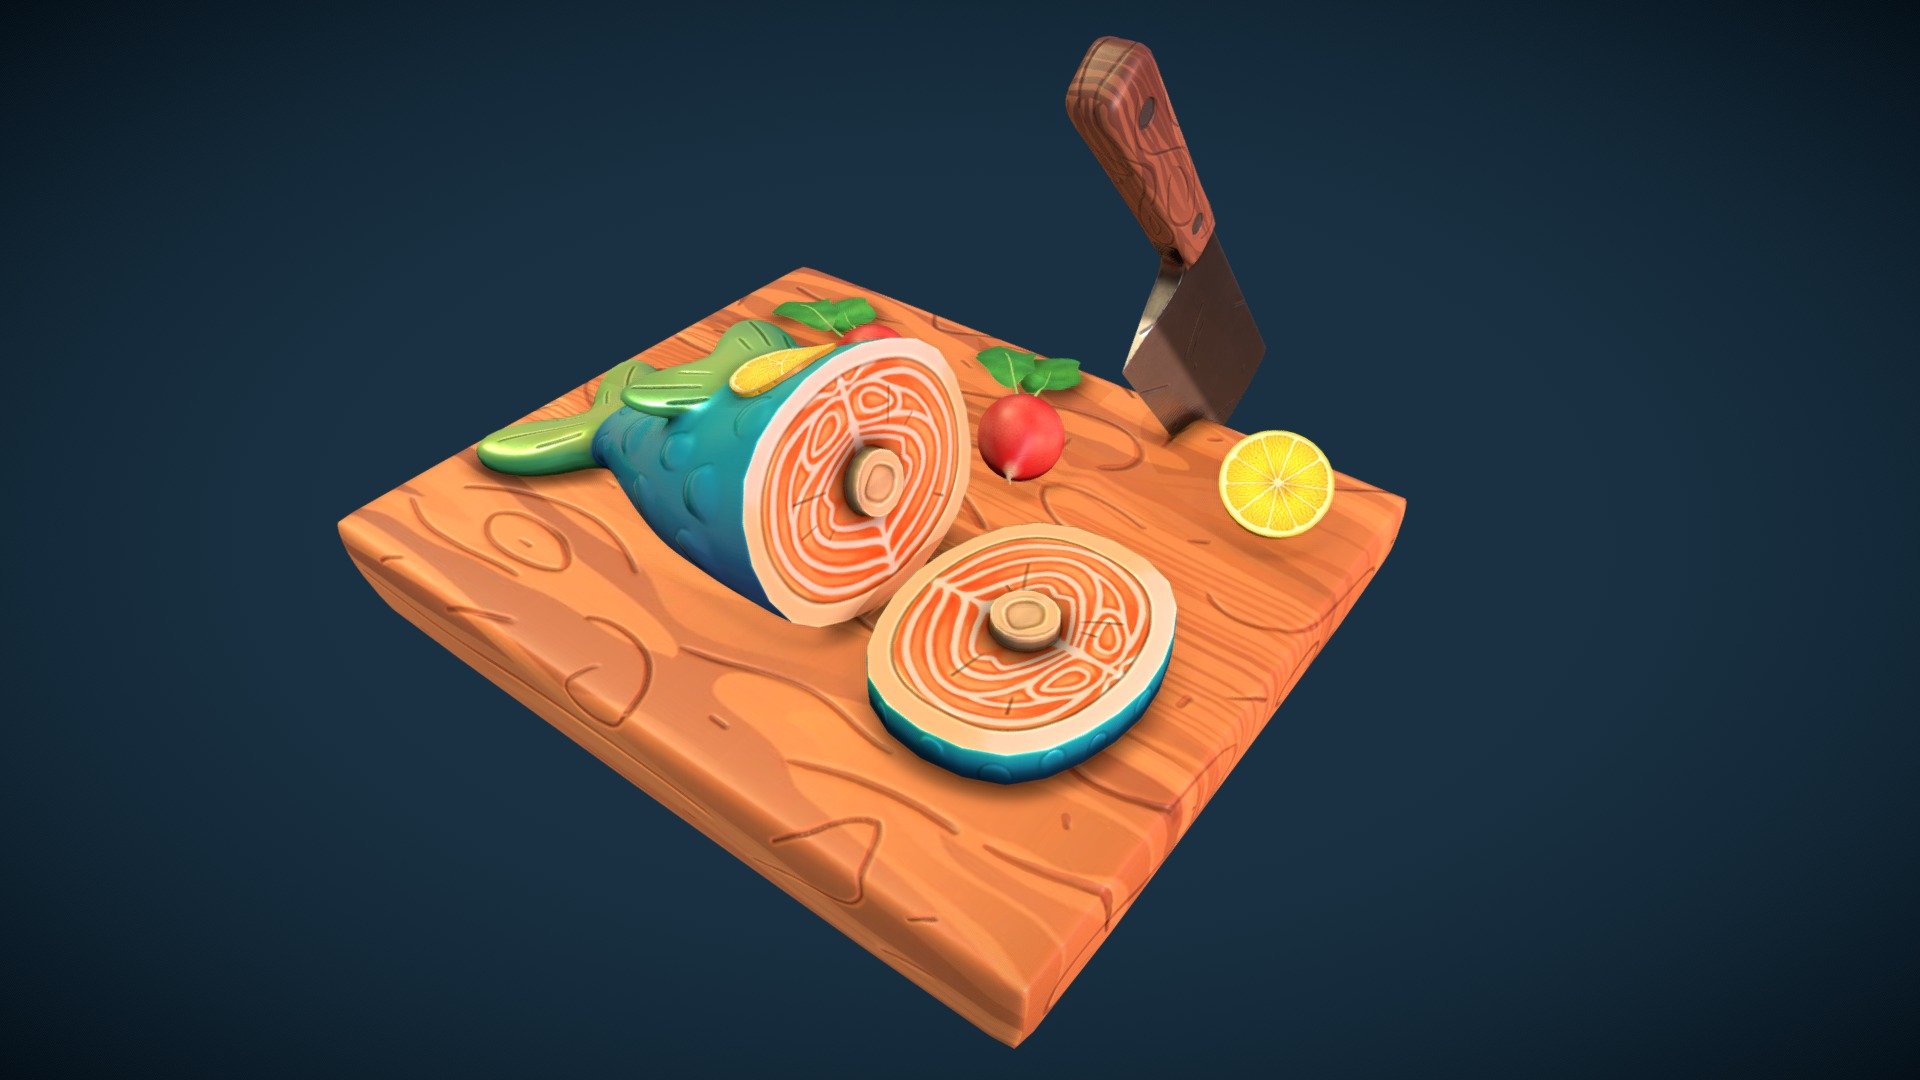 A delicious low poly fish prop with cuttingboard, knife, and radishes. Ready for to be in an in game prop.
Will be sold on my Artstation profile.
Created in Blender by me for any game, vr, vr chat, personal use 3d model